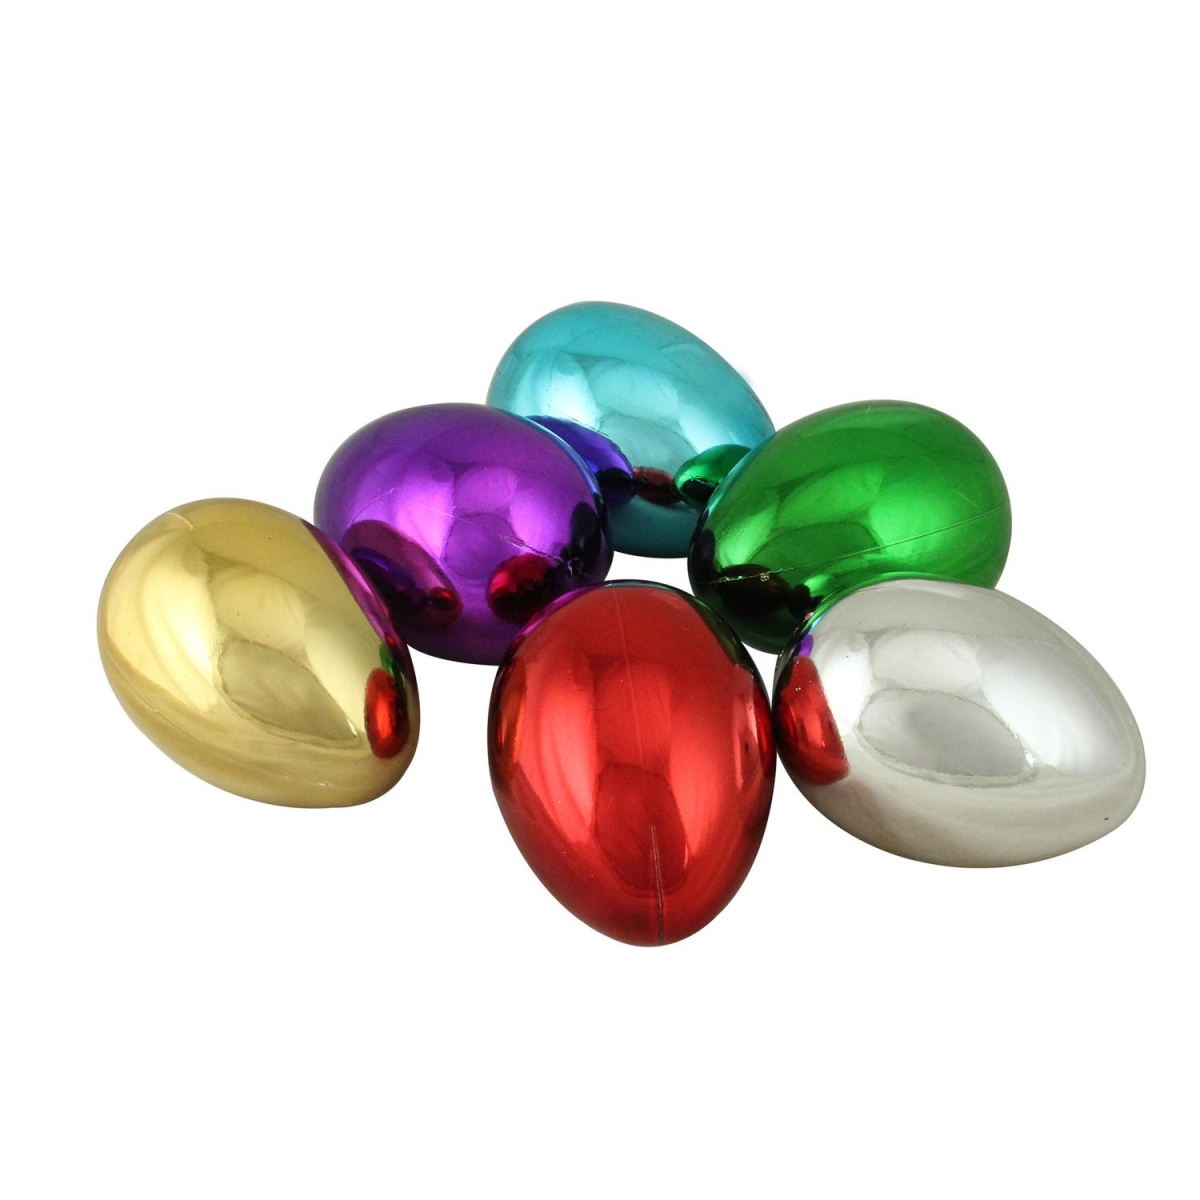 Picture of Northlight 32733329 3.5 in. Springtime Metallic Colored Medium Size Easter Egg Decorations, Set of 6